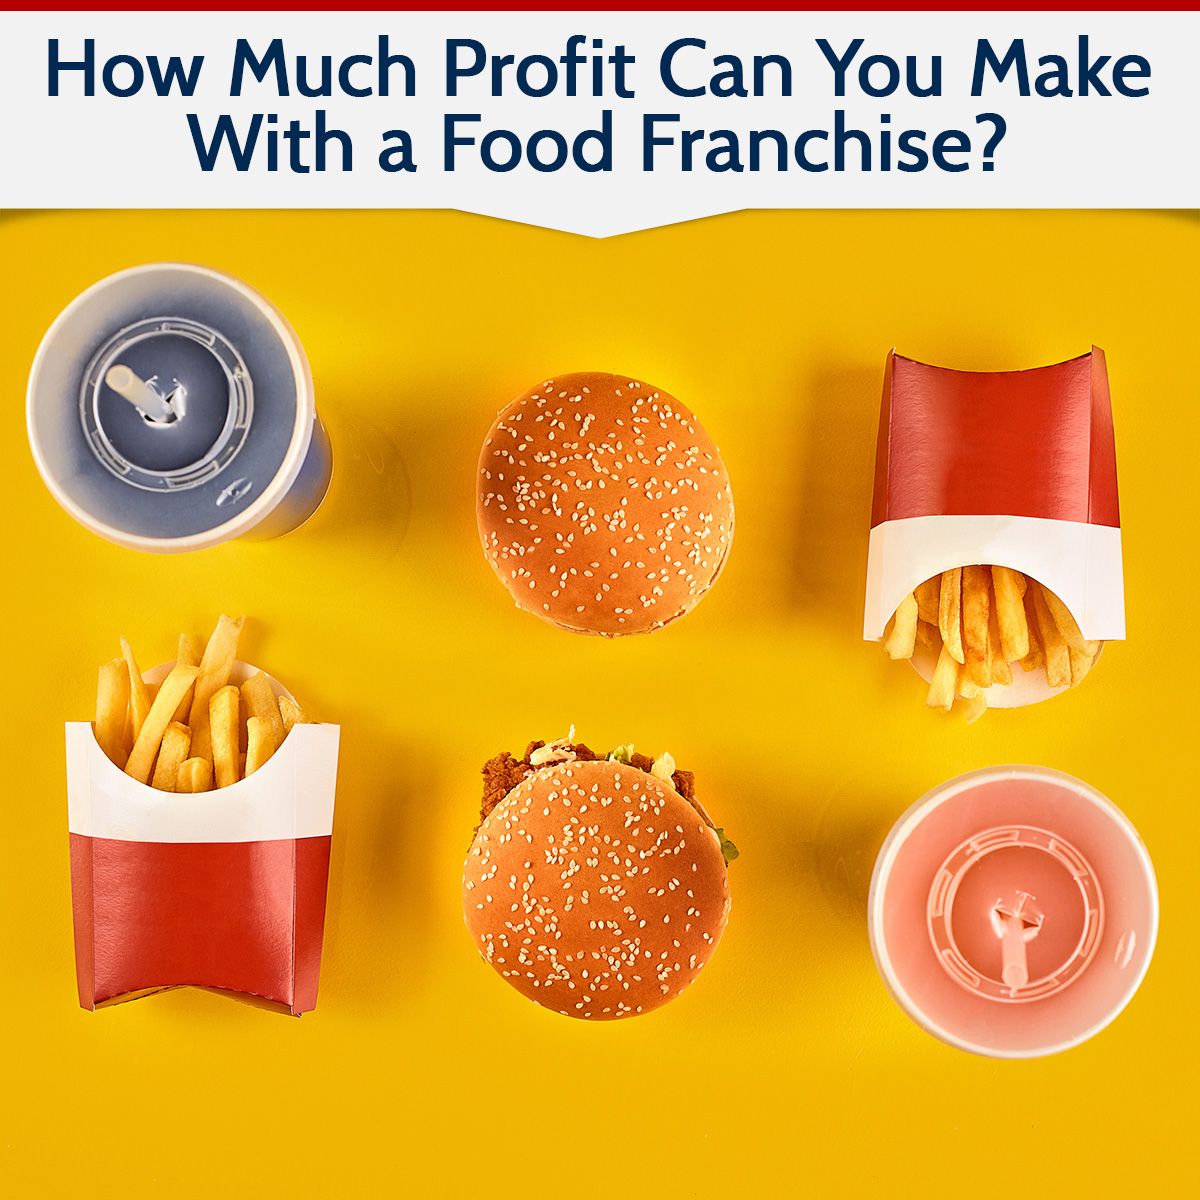 How Much Profit Can You Make With a Food Franchise?